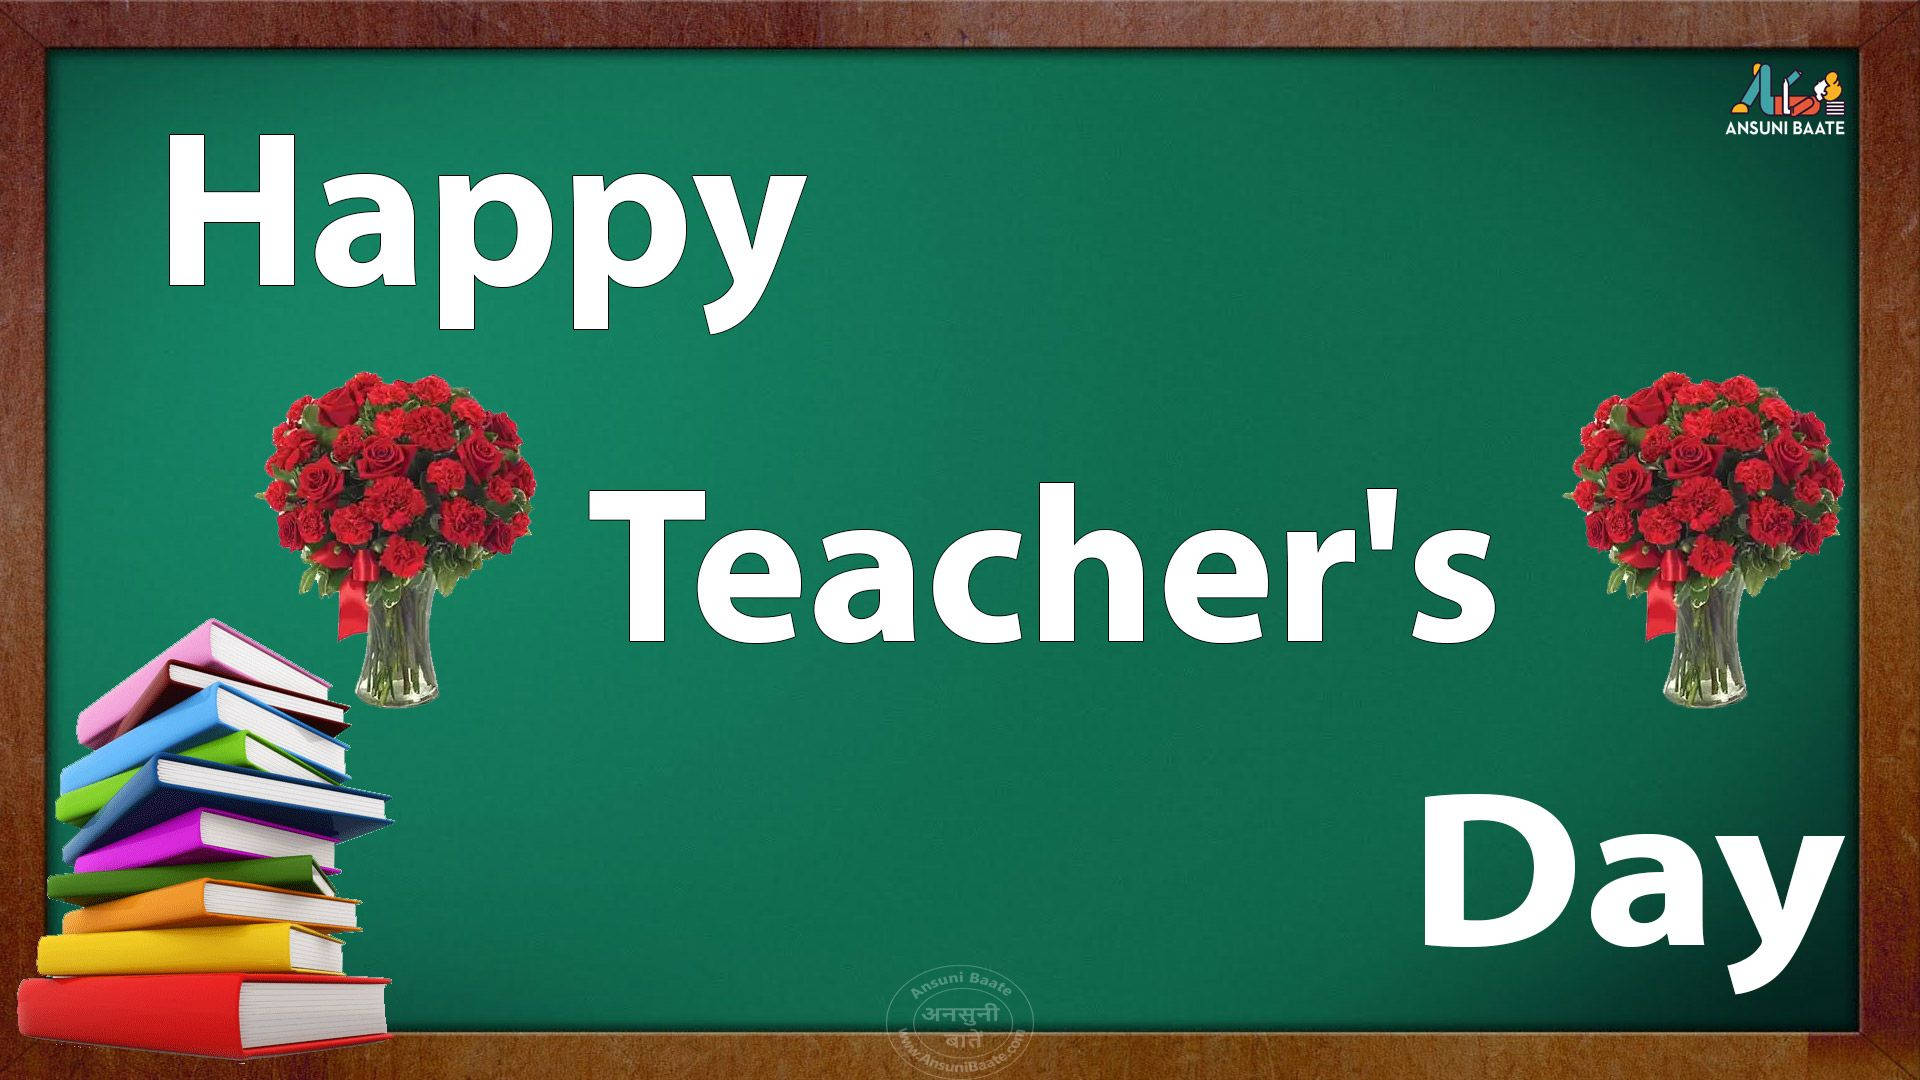 Happy Teachers' Day Books And Roses